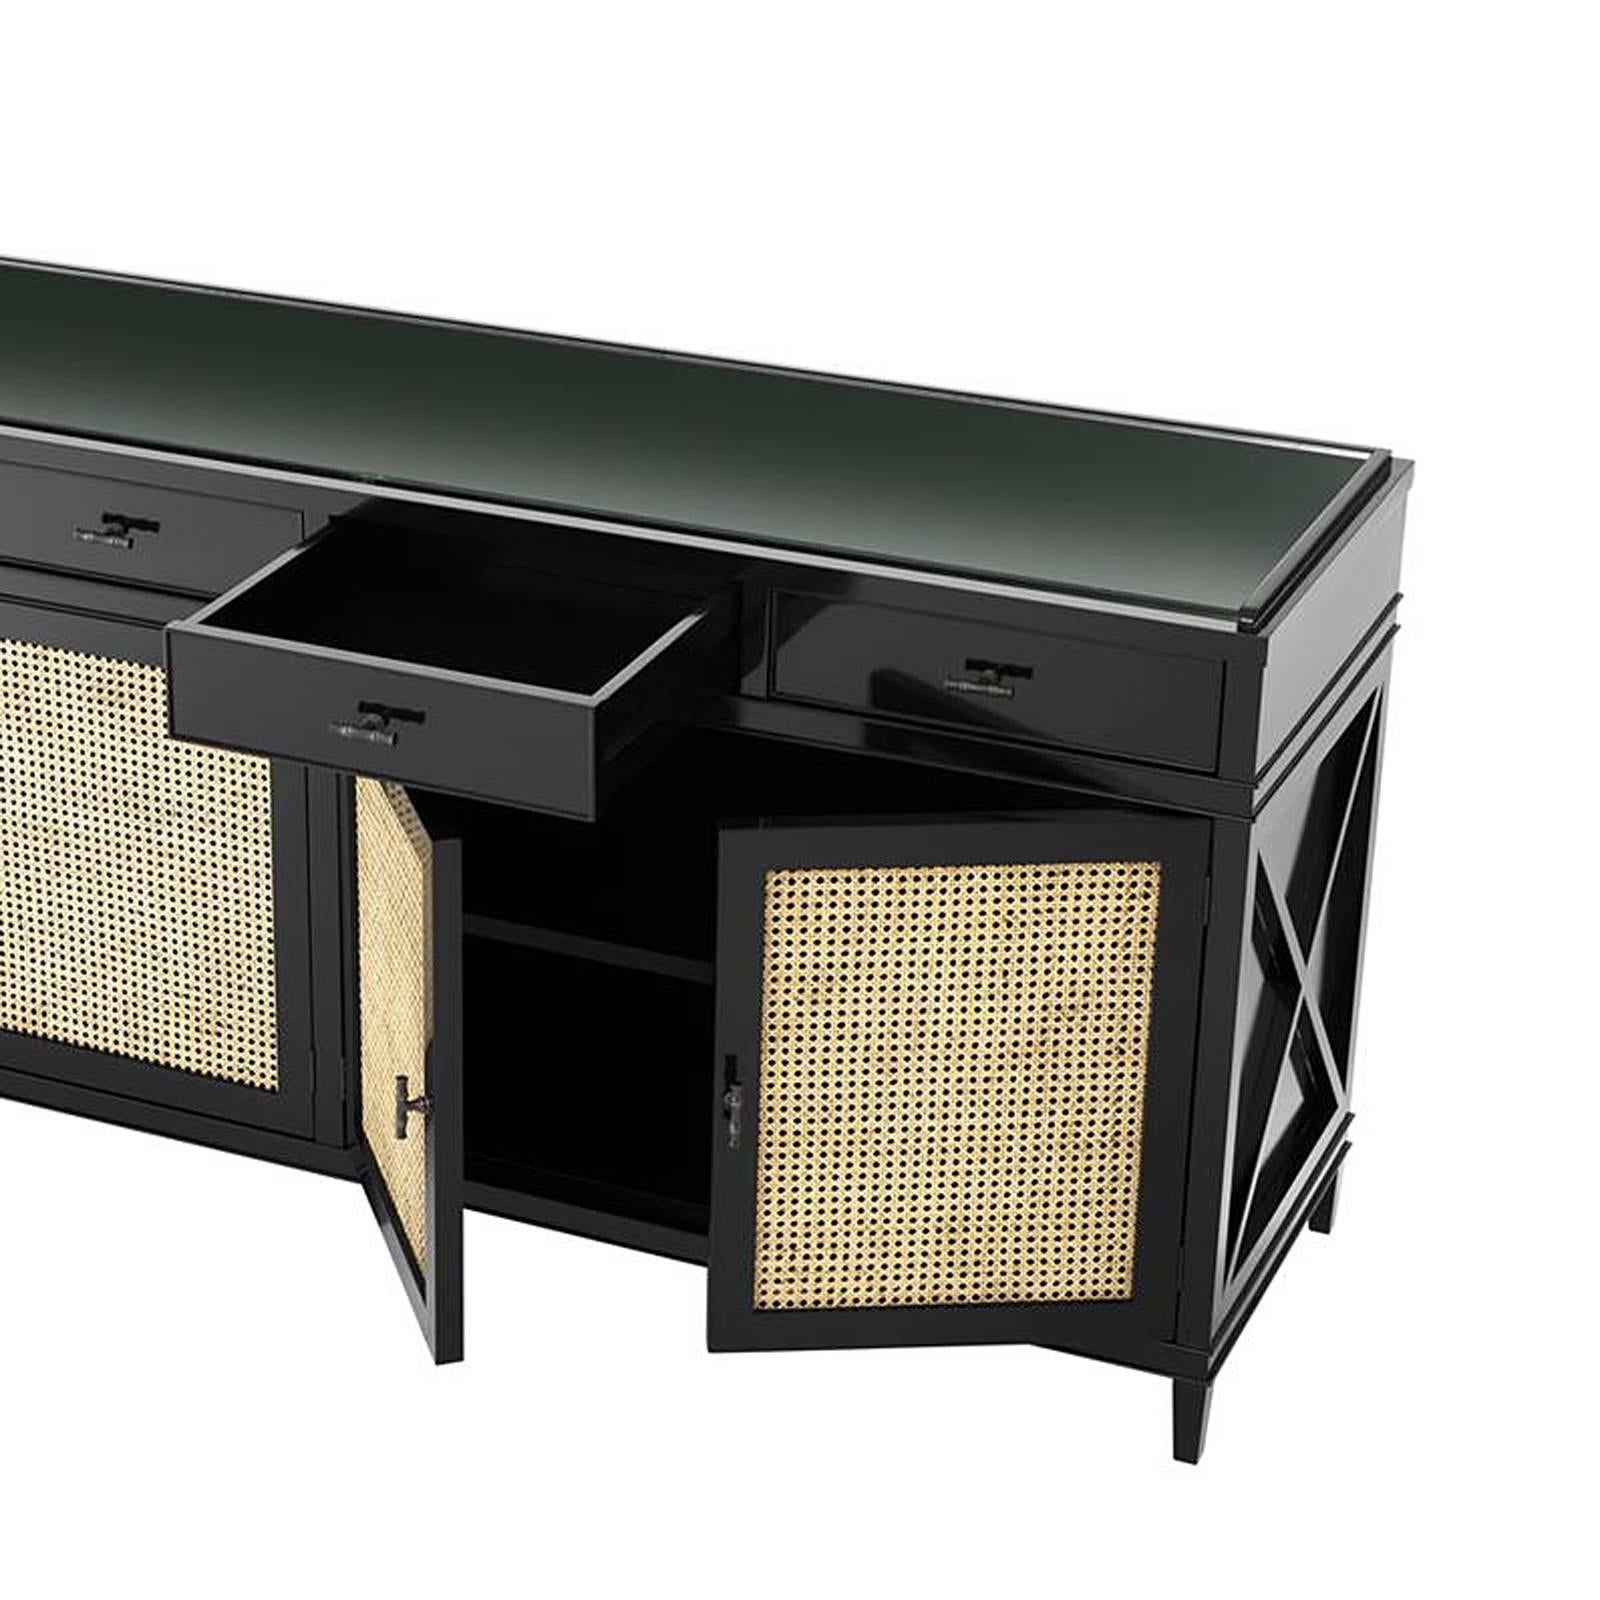 Hand-Crafted Evora Sideboard in Black Lacquered Solid Mahogany Wood